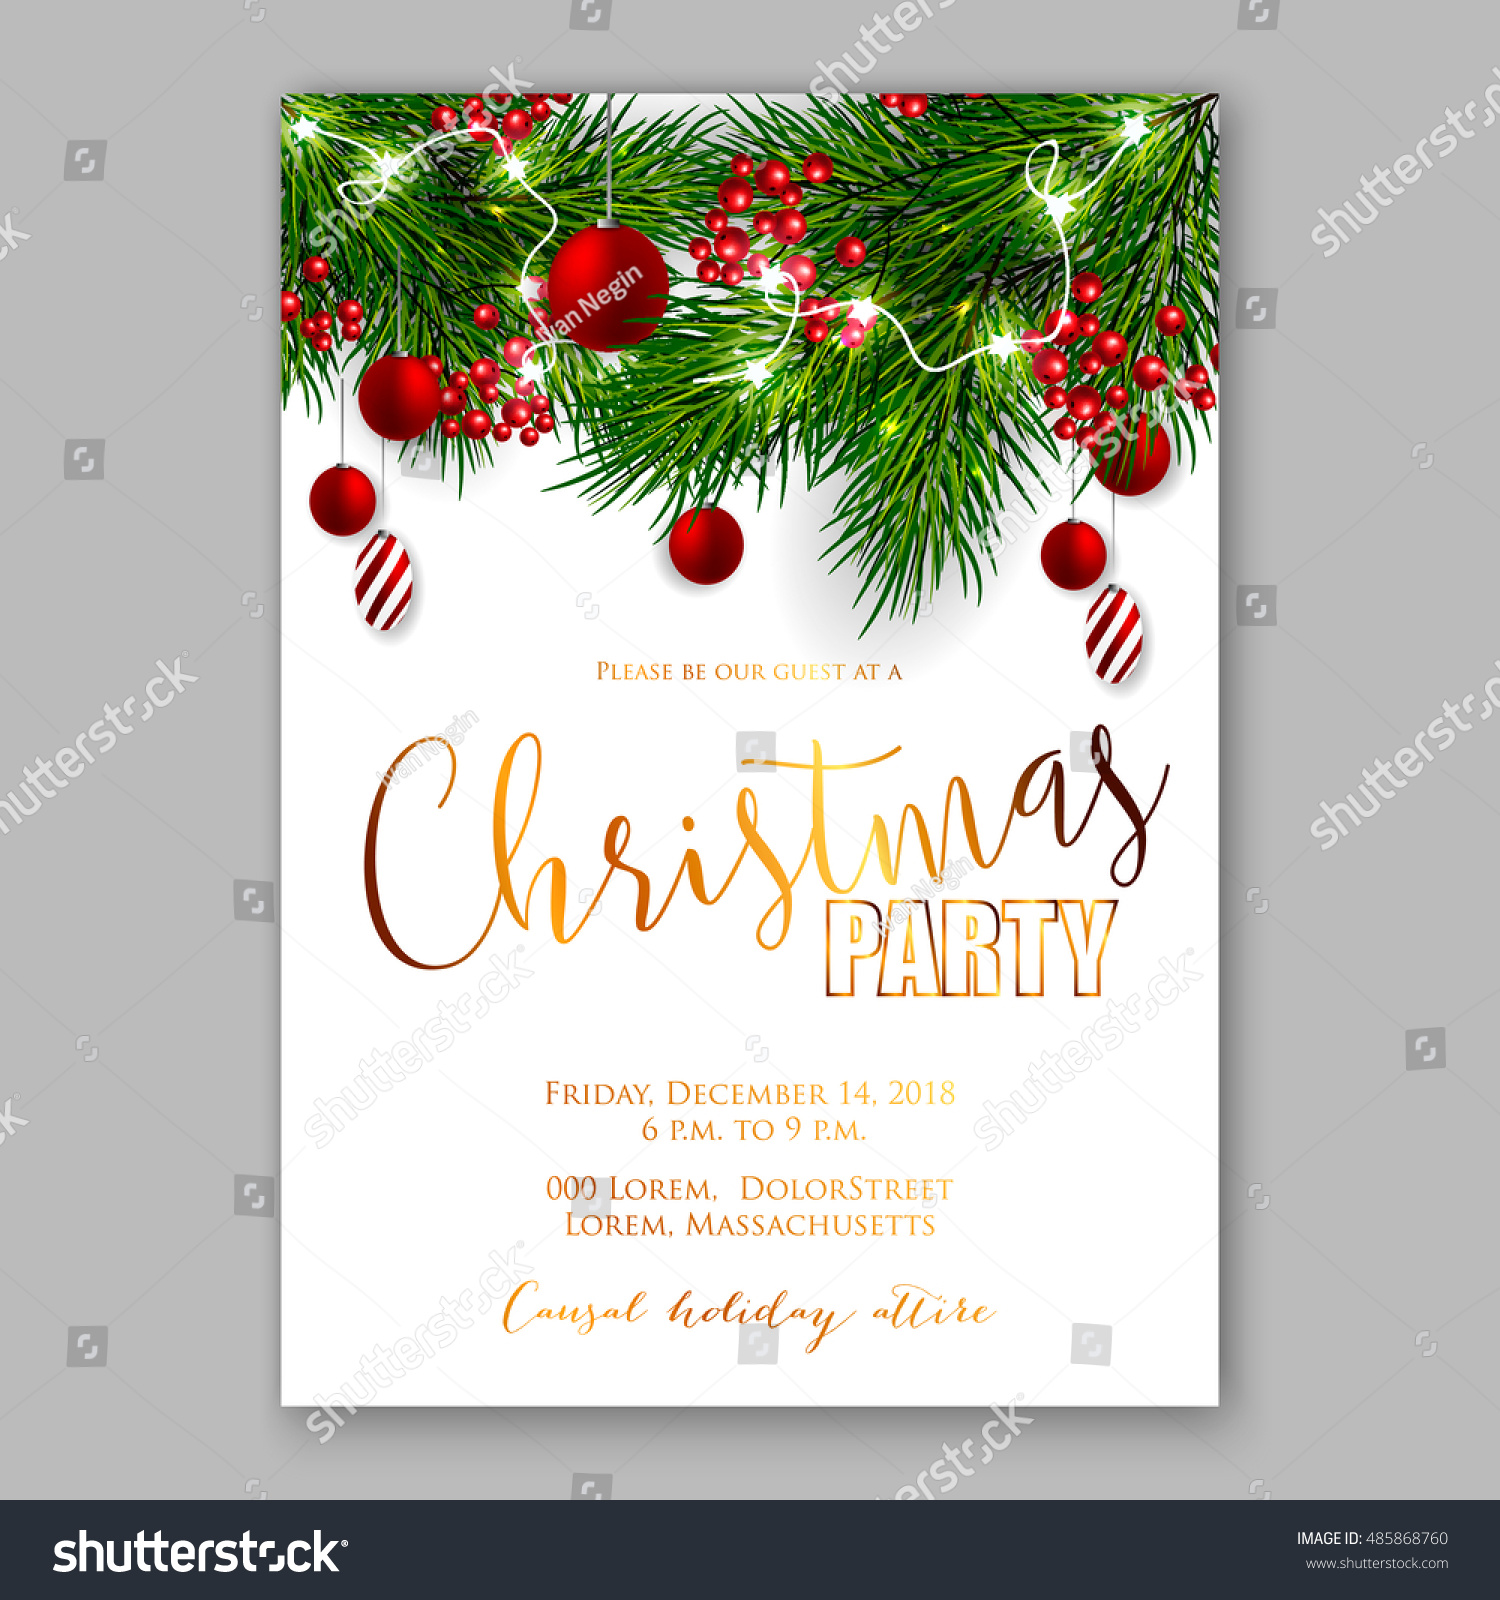 Christmas Party Invitation Template Background Fir Stock Vector ...